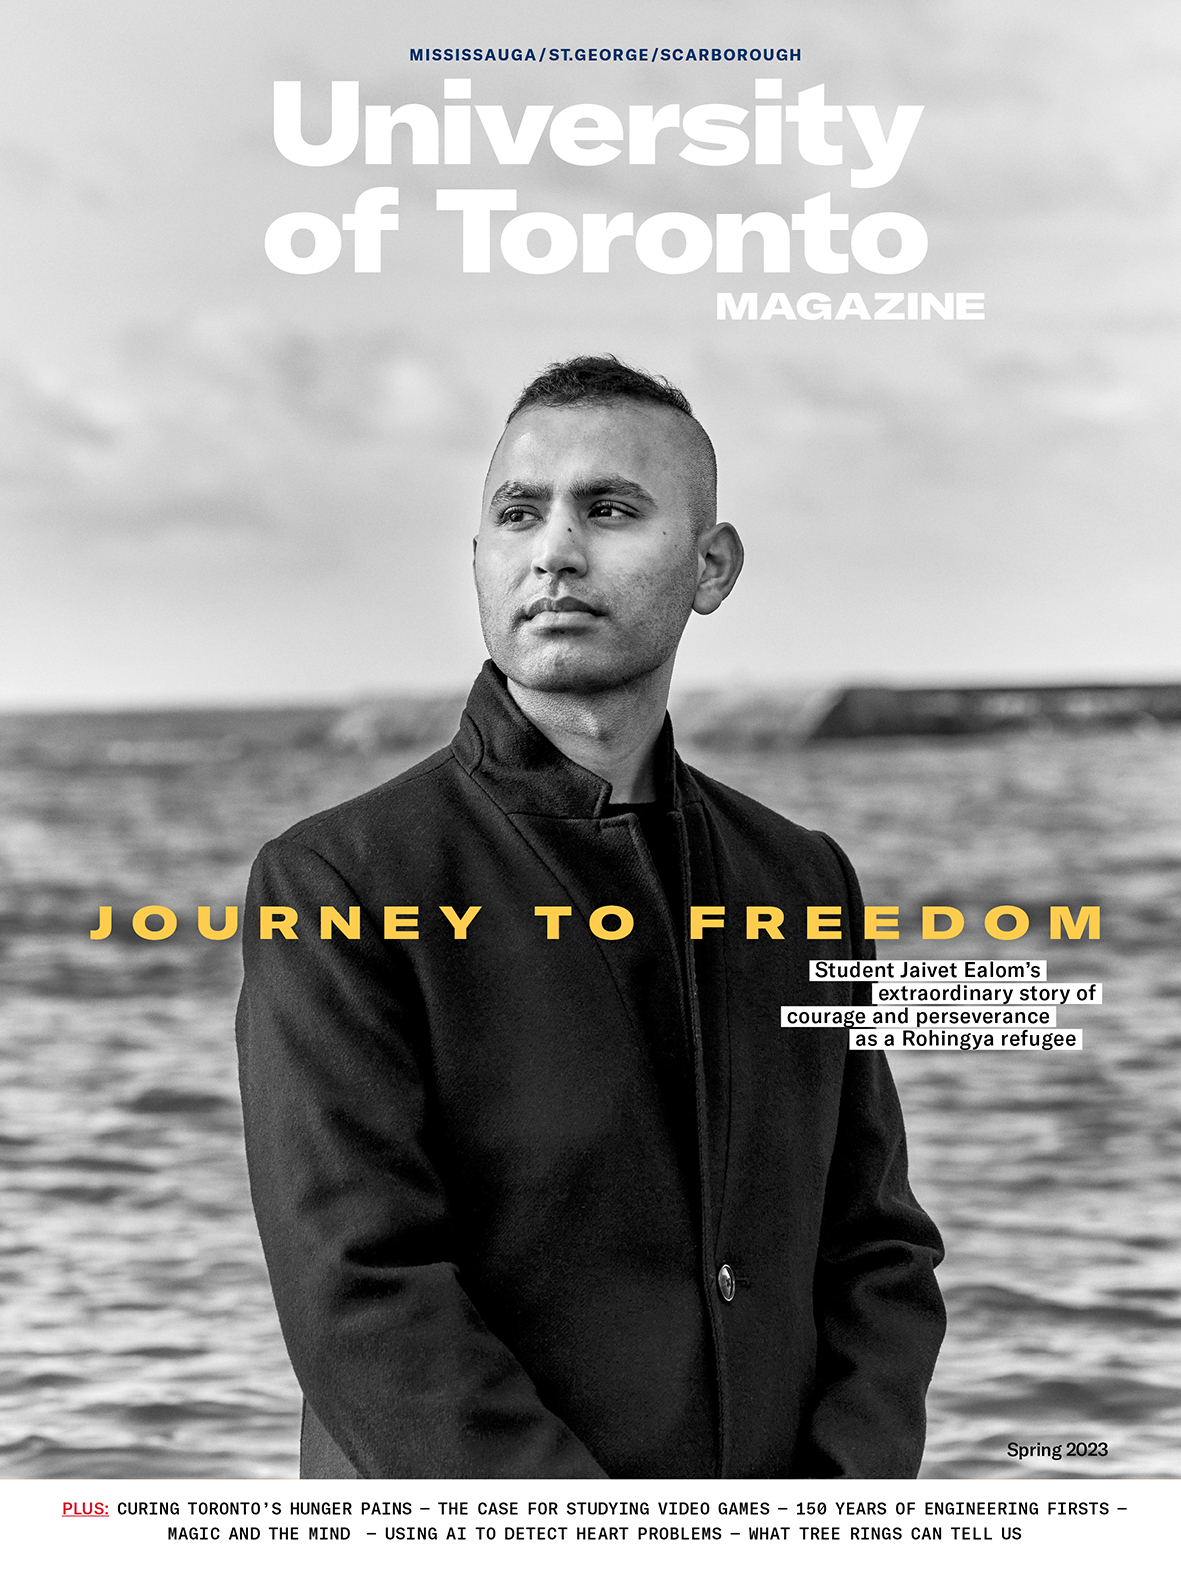 Cover of University of Toronto Magazine Spring 2023 issue, showing a black and white photo, from the waist up, of U of T student Jaivet Ealom, wearing a black overcoat and looking off camera, with a large open body of water in the background. The article title, 